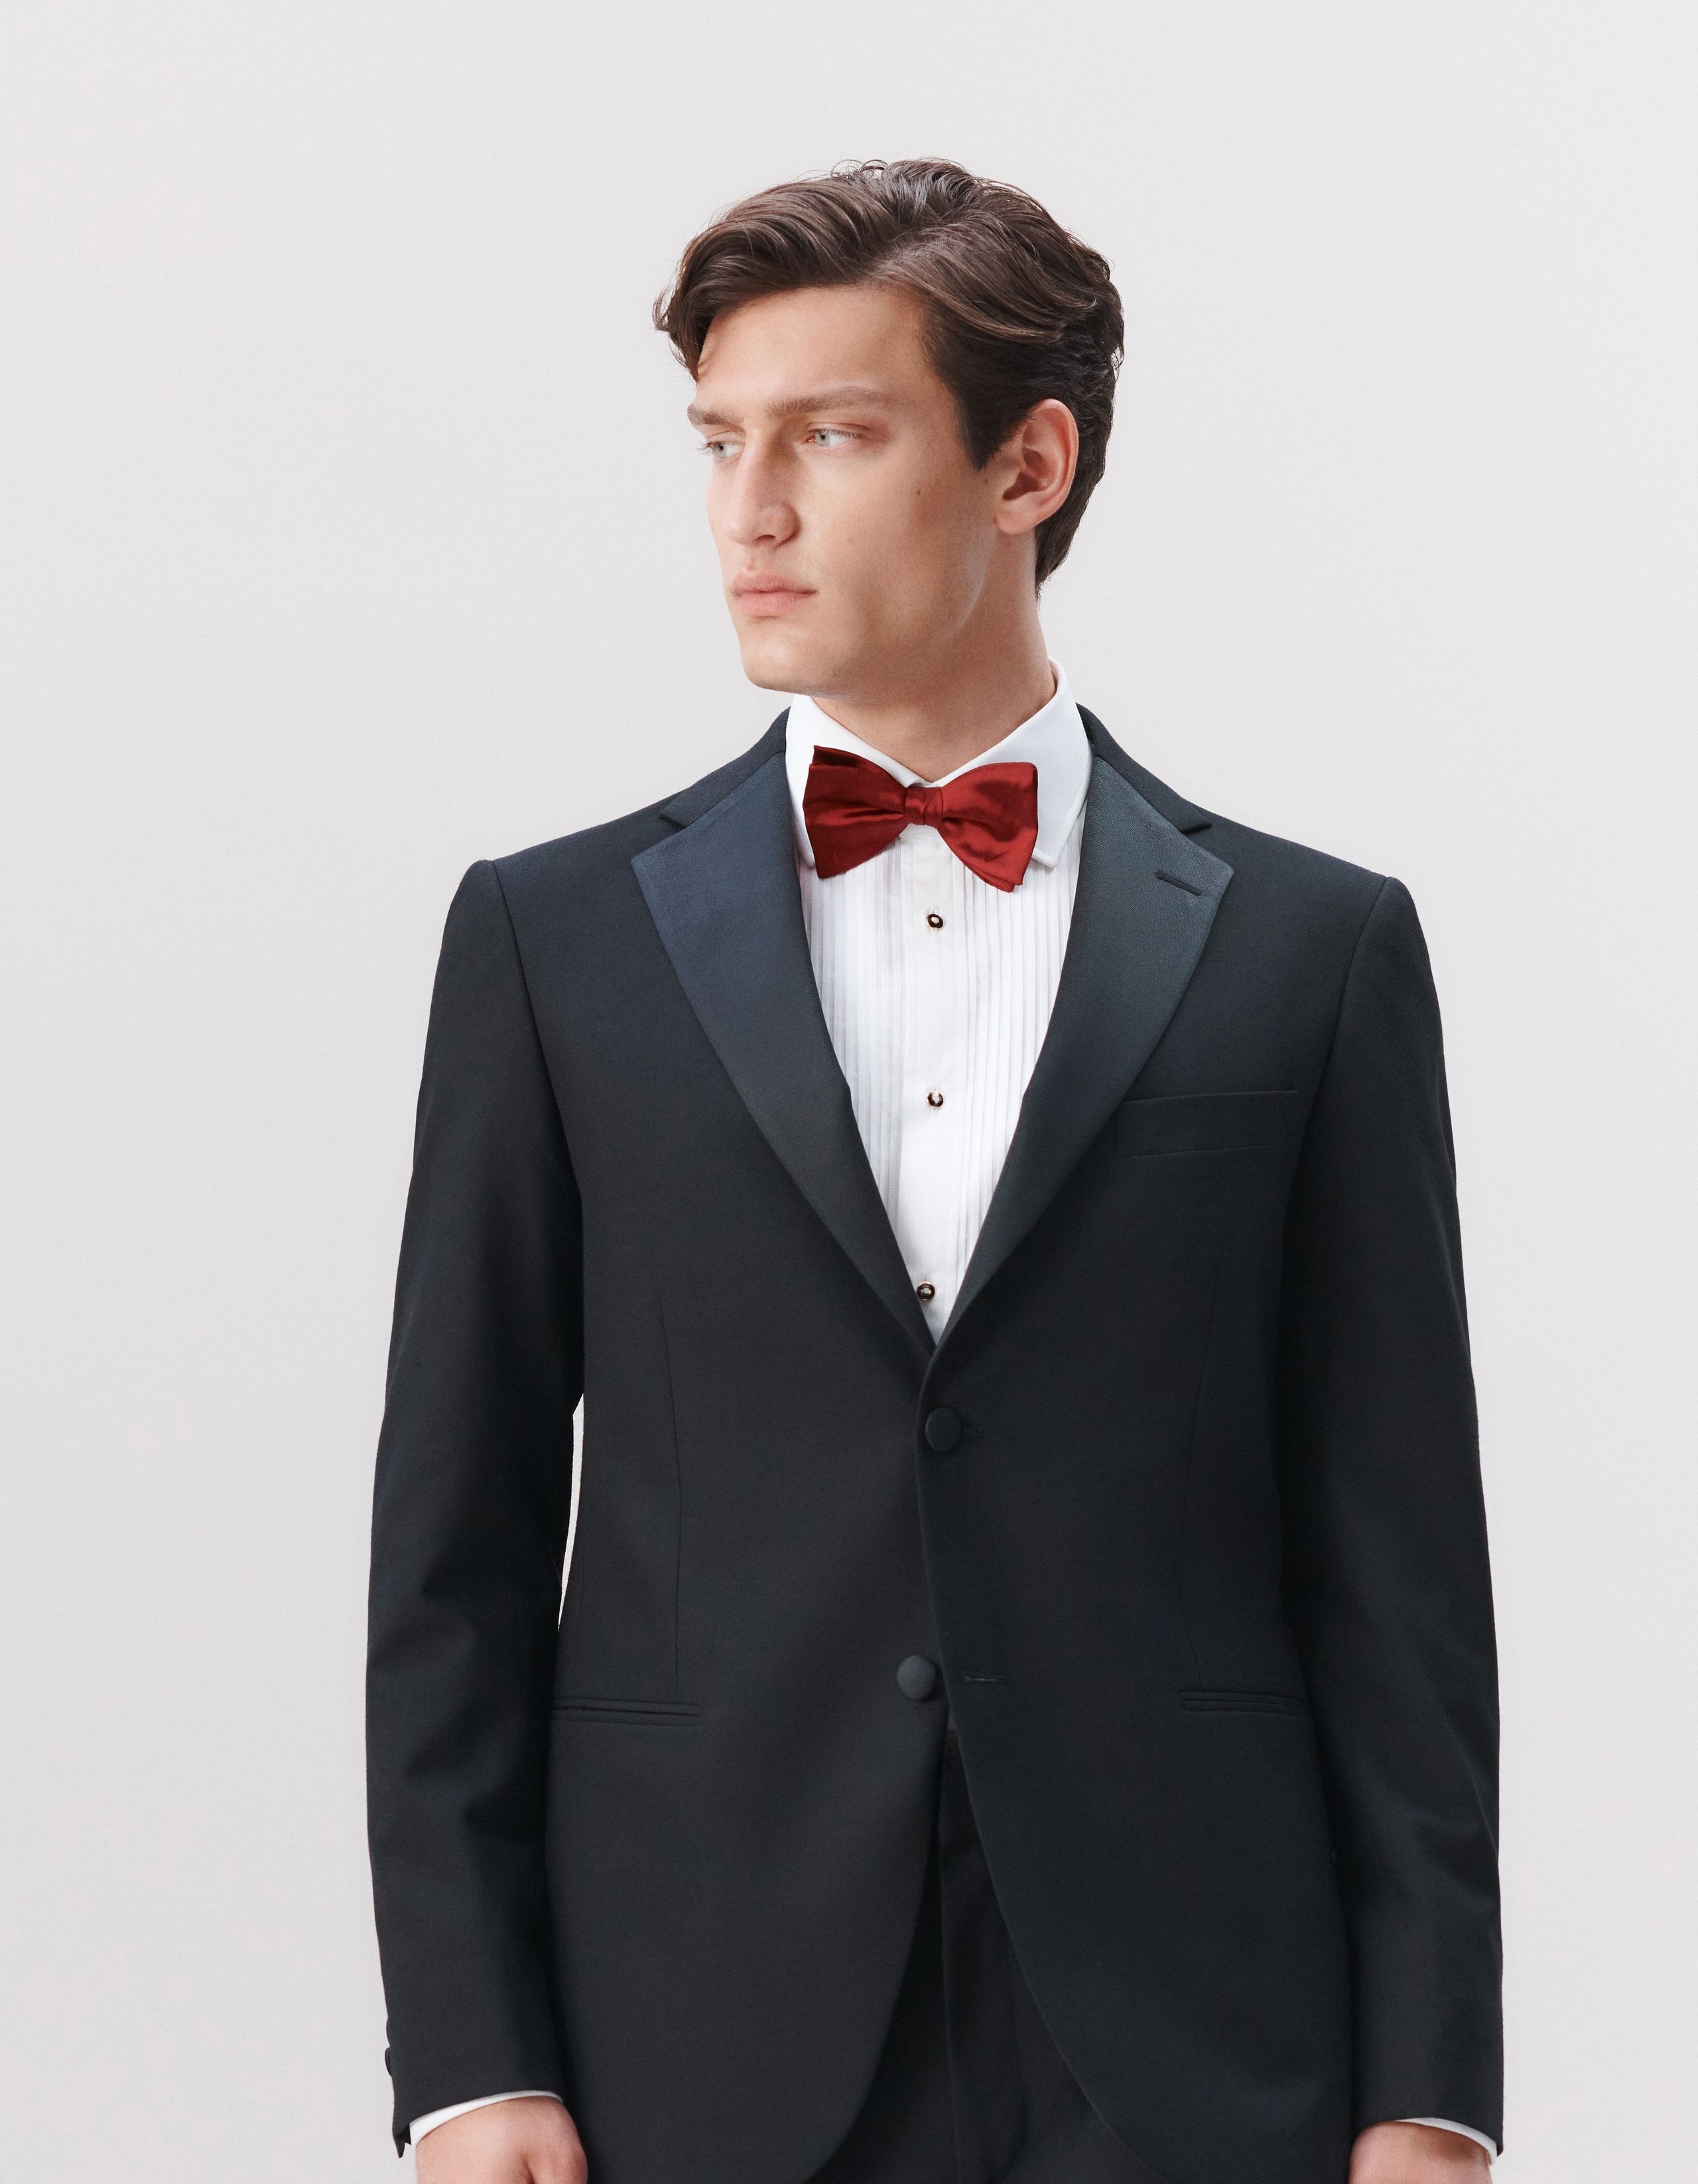 A man wears a black evening jacket, white evening shirt with a red bow tie